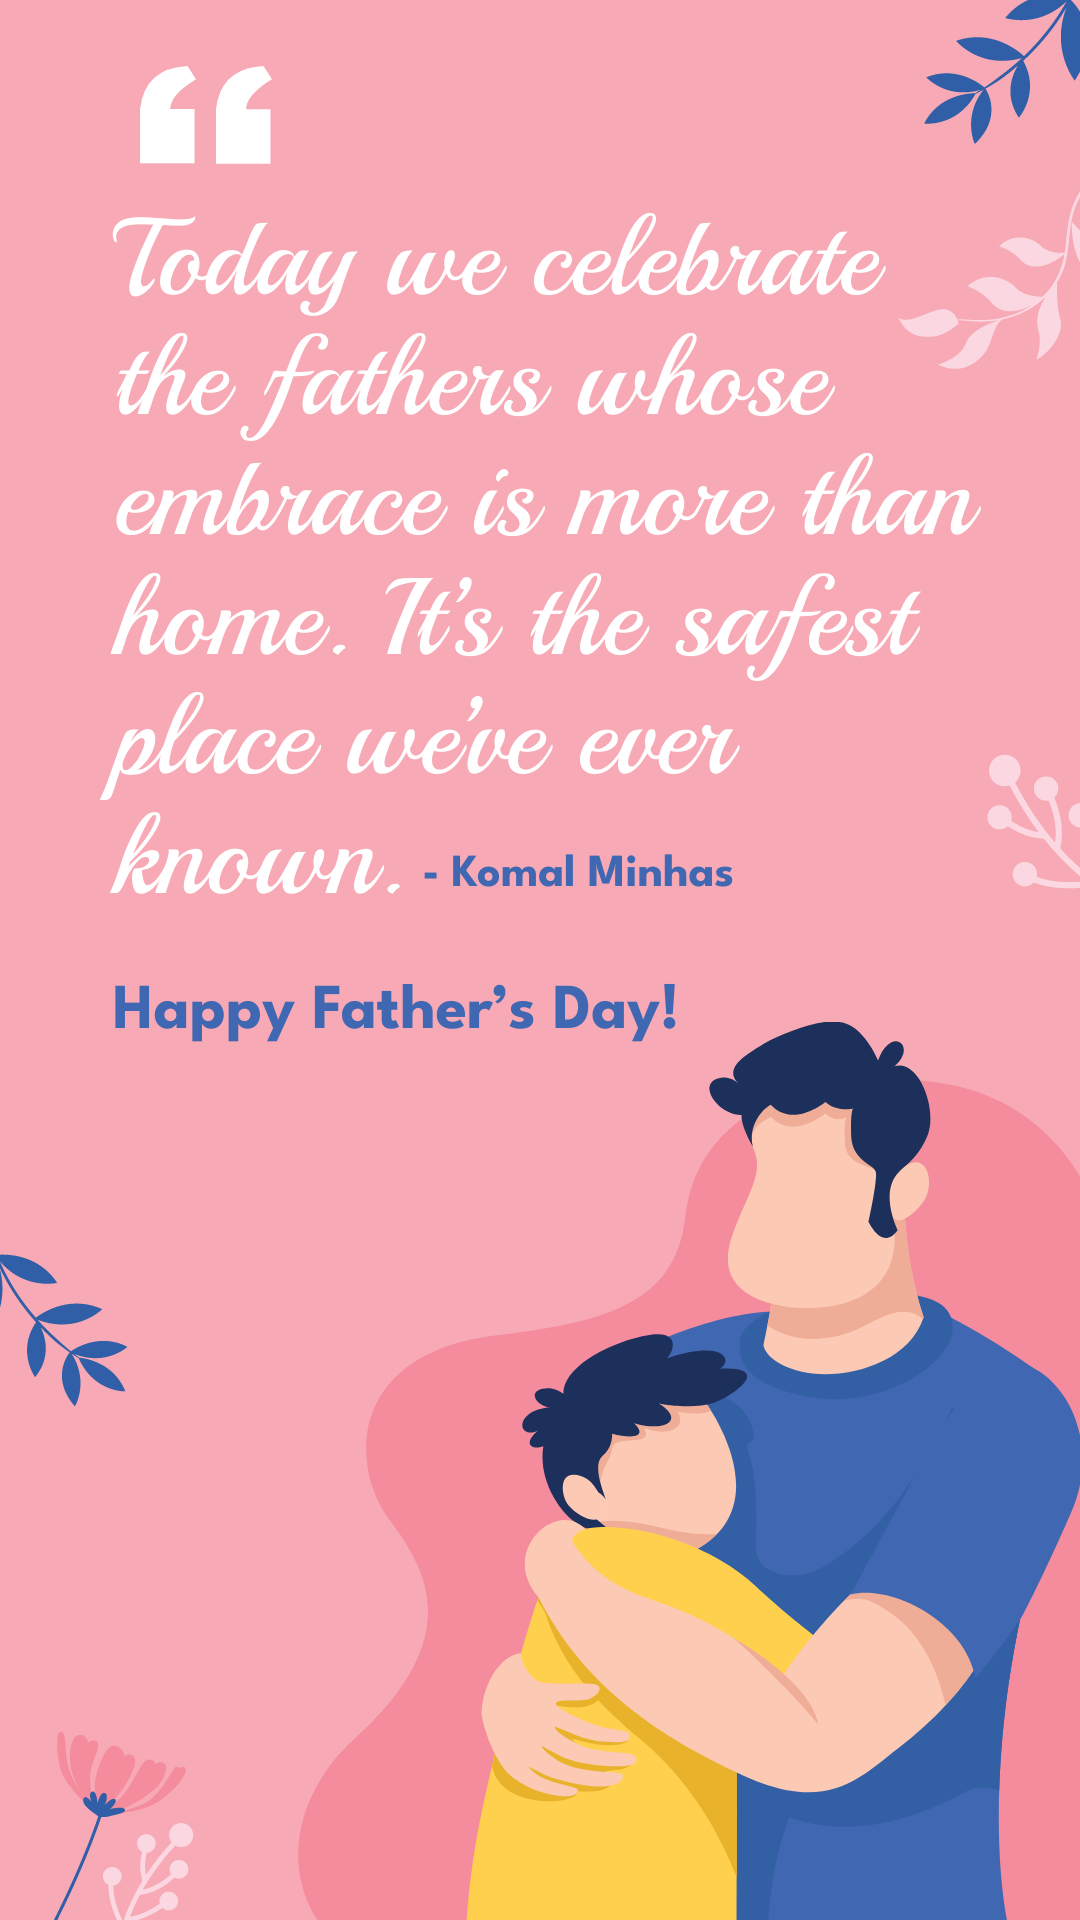 Father's Day Celebration Quote